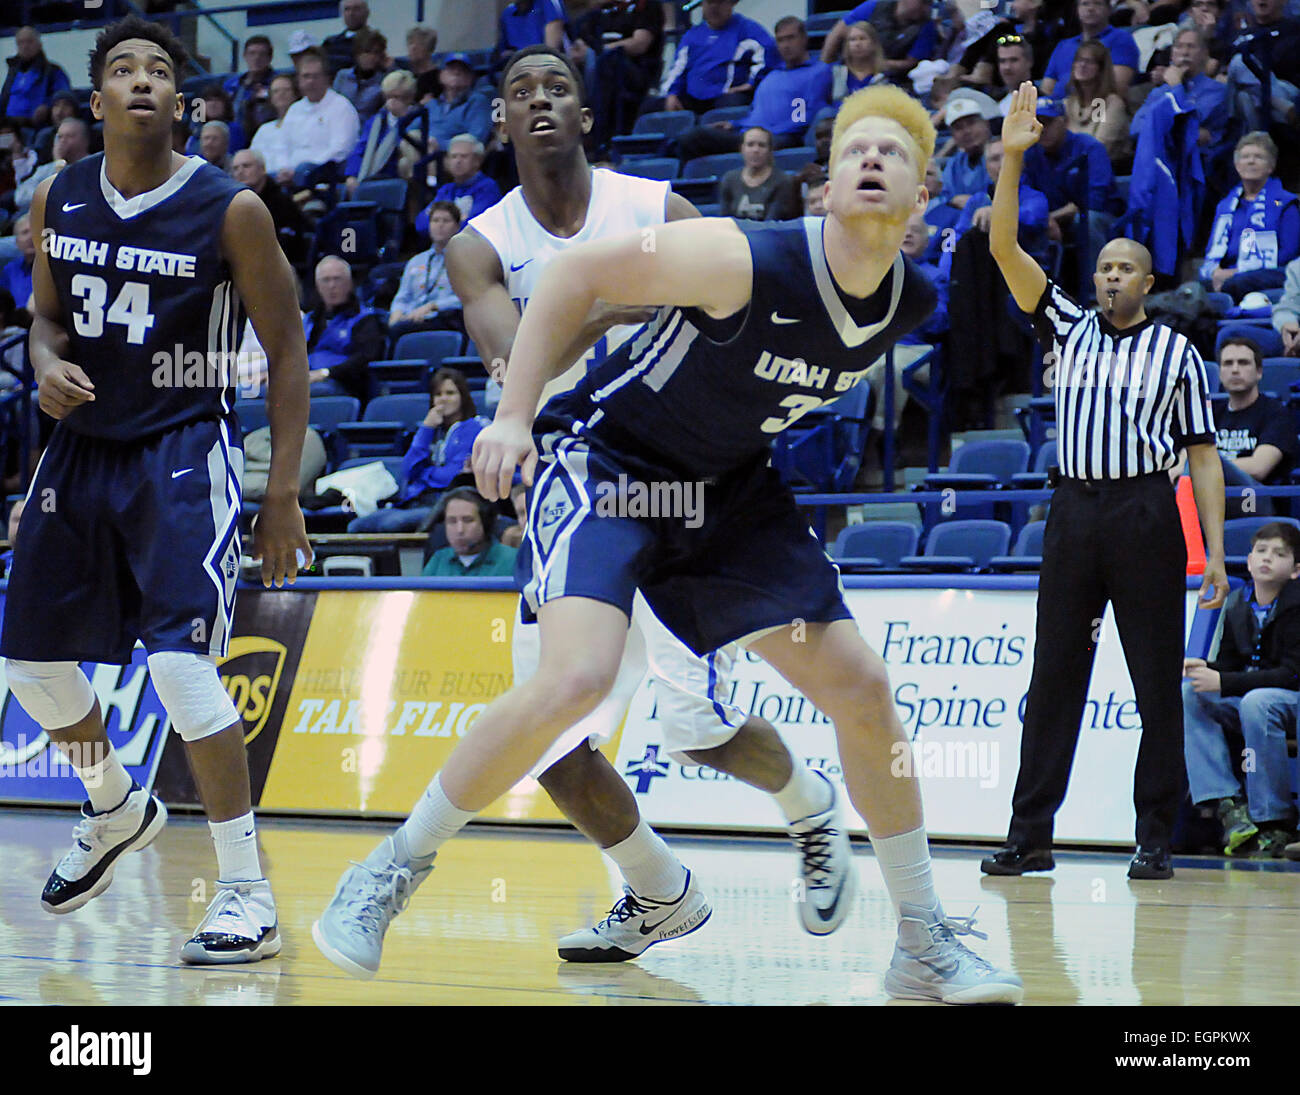 Colorado Springs, Colorado, USA. 28th Feb, 2015. Utah State forward, Sean Harris #30, controls the lane during an NCAA basketball game between the Utah State Aggies and the Air Force Academy Falcons at Clune Arena, U.S. Air Force Academy, Colorado Springs, Colorado. Utah State defeats Air Force 74-60. © csm/Alamy Live News Stock Photo